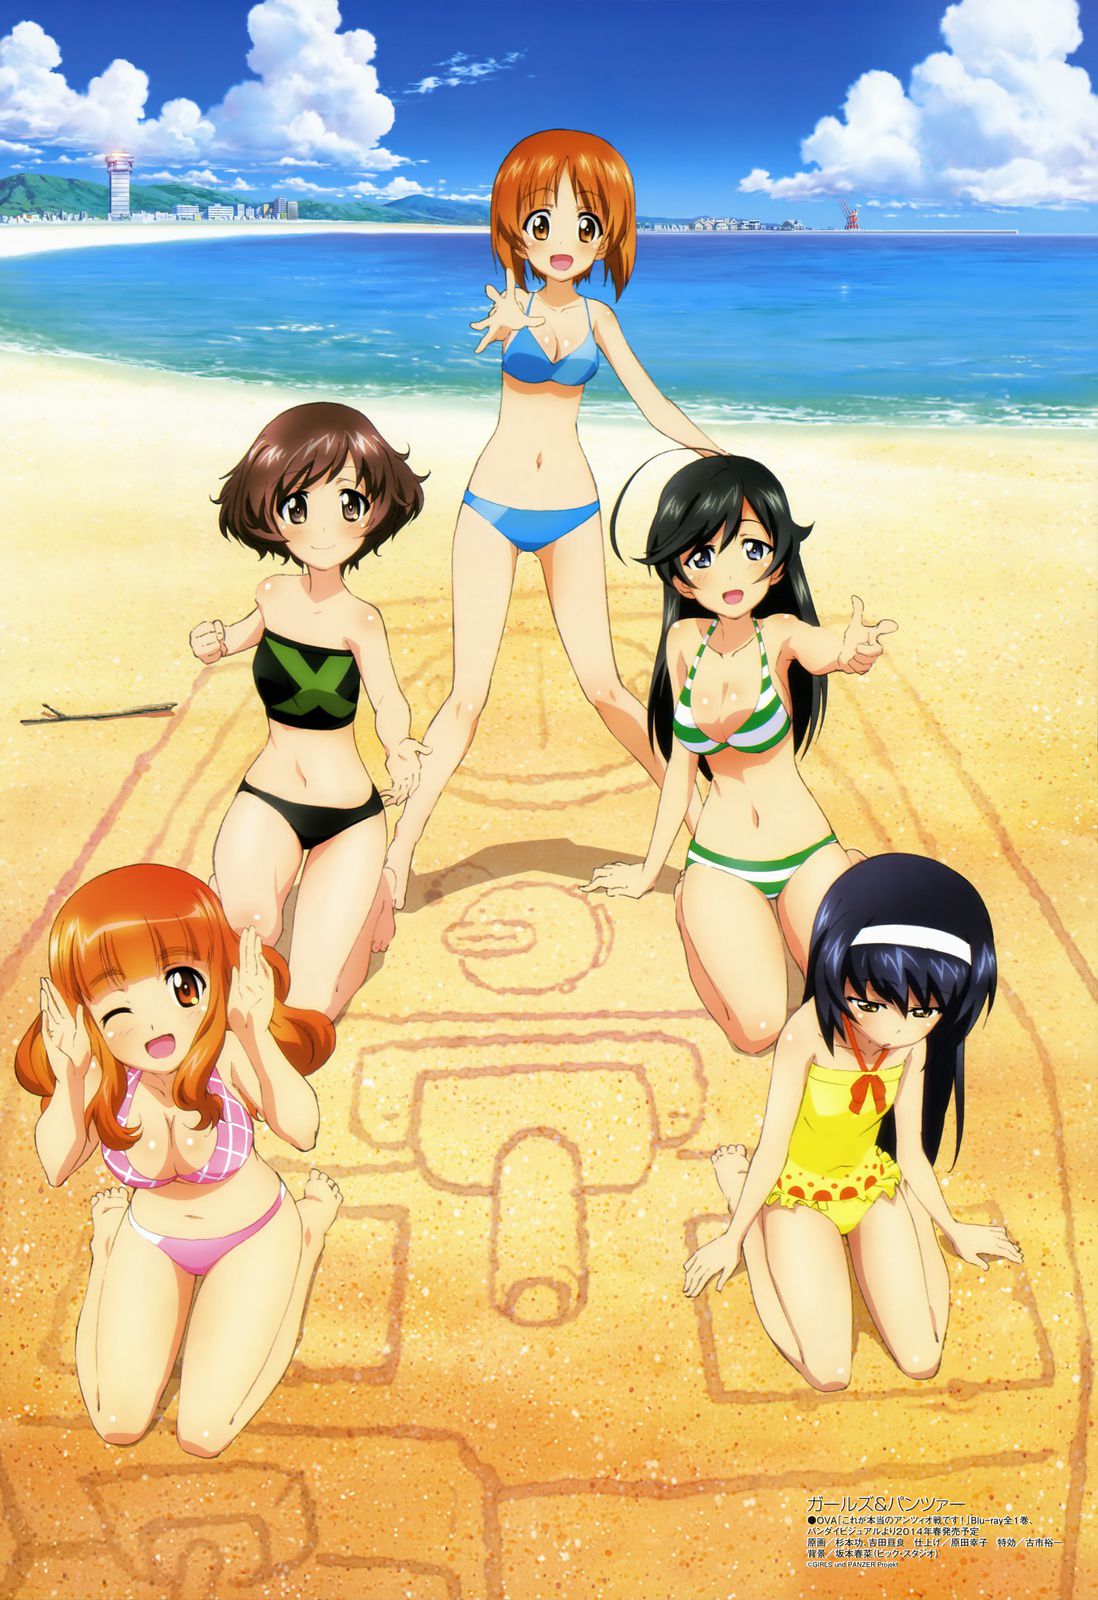 Stripping of official illustrations of Girls und Panzer (with original picture) 4